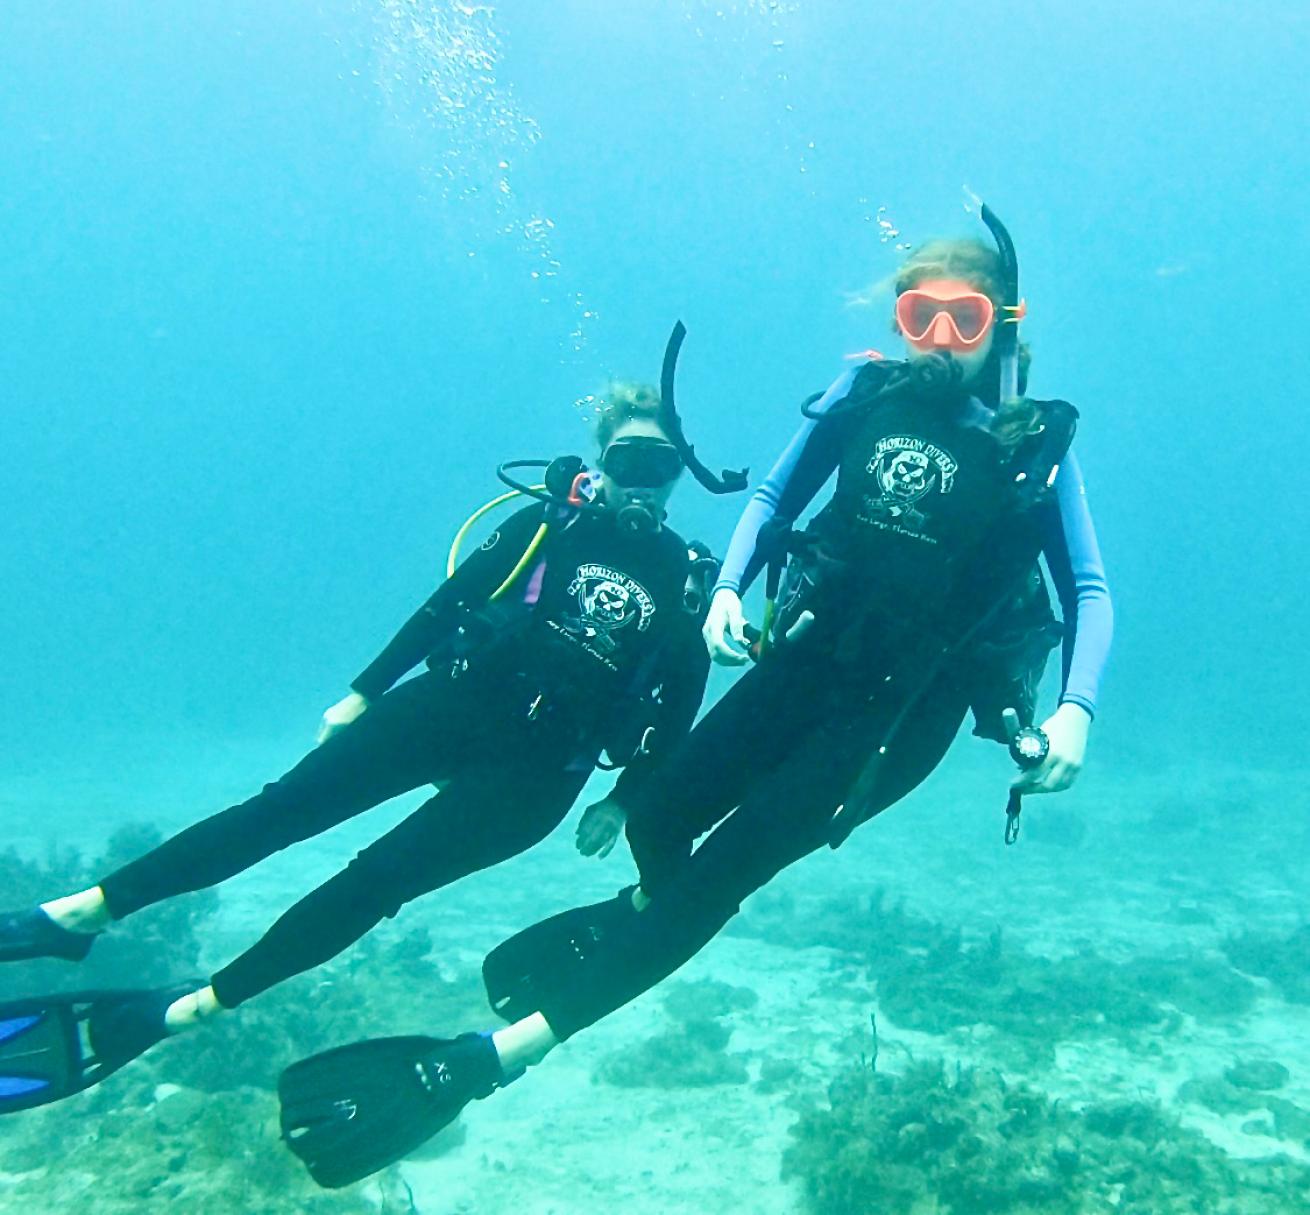 Impactful Life Lessons From Scuba Diving in the Florida Keys